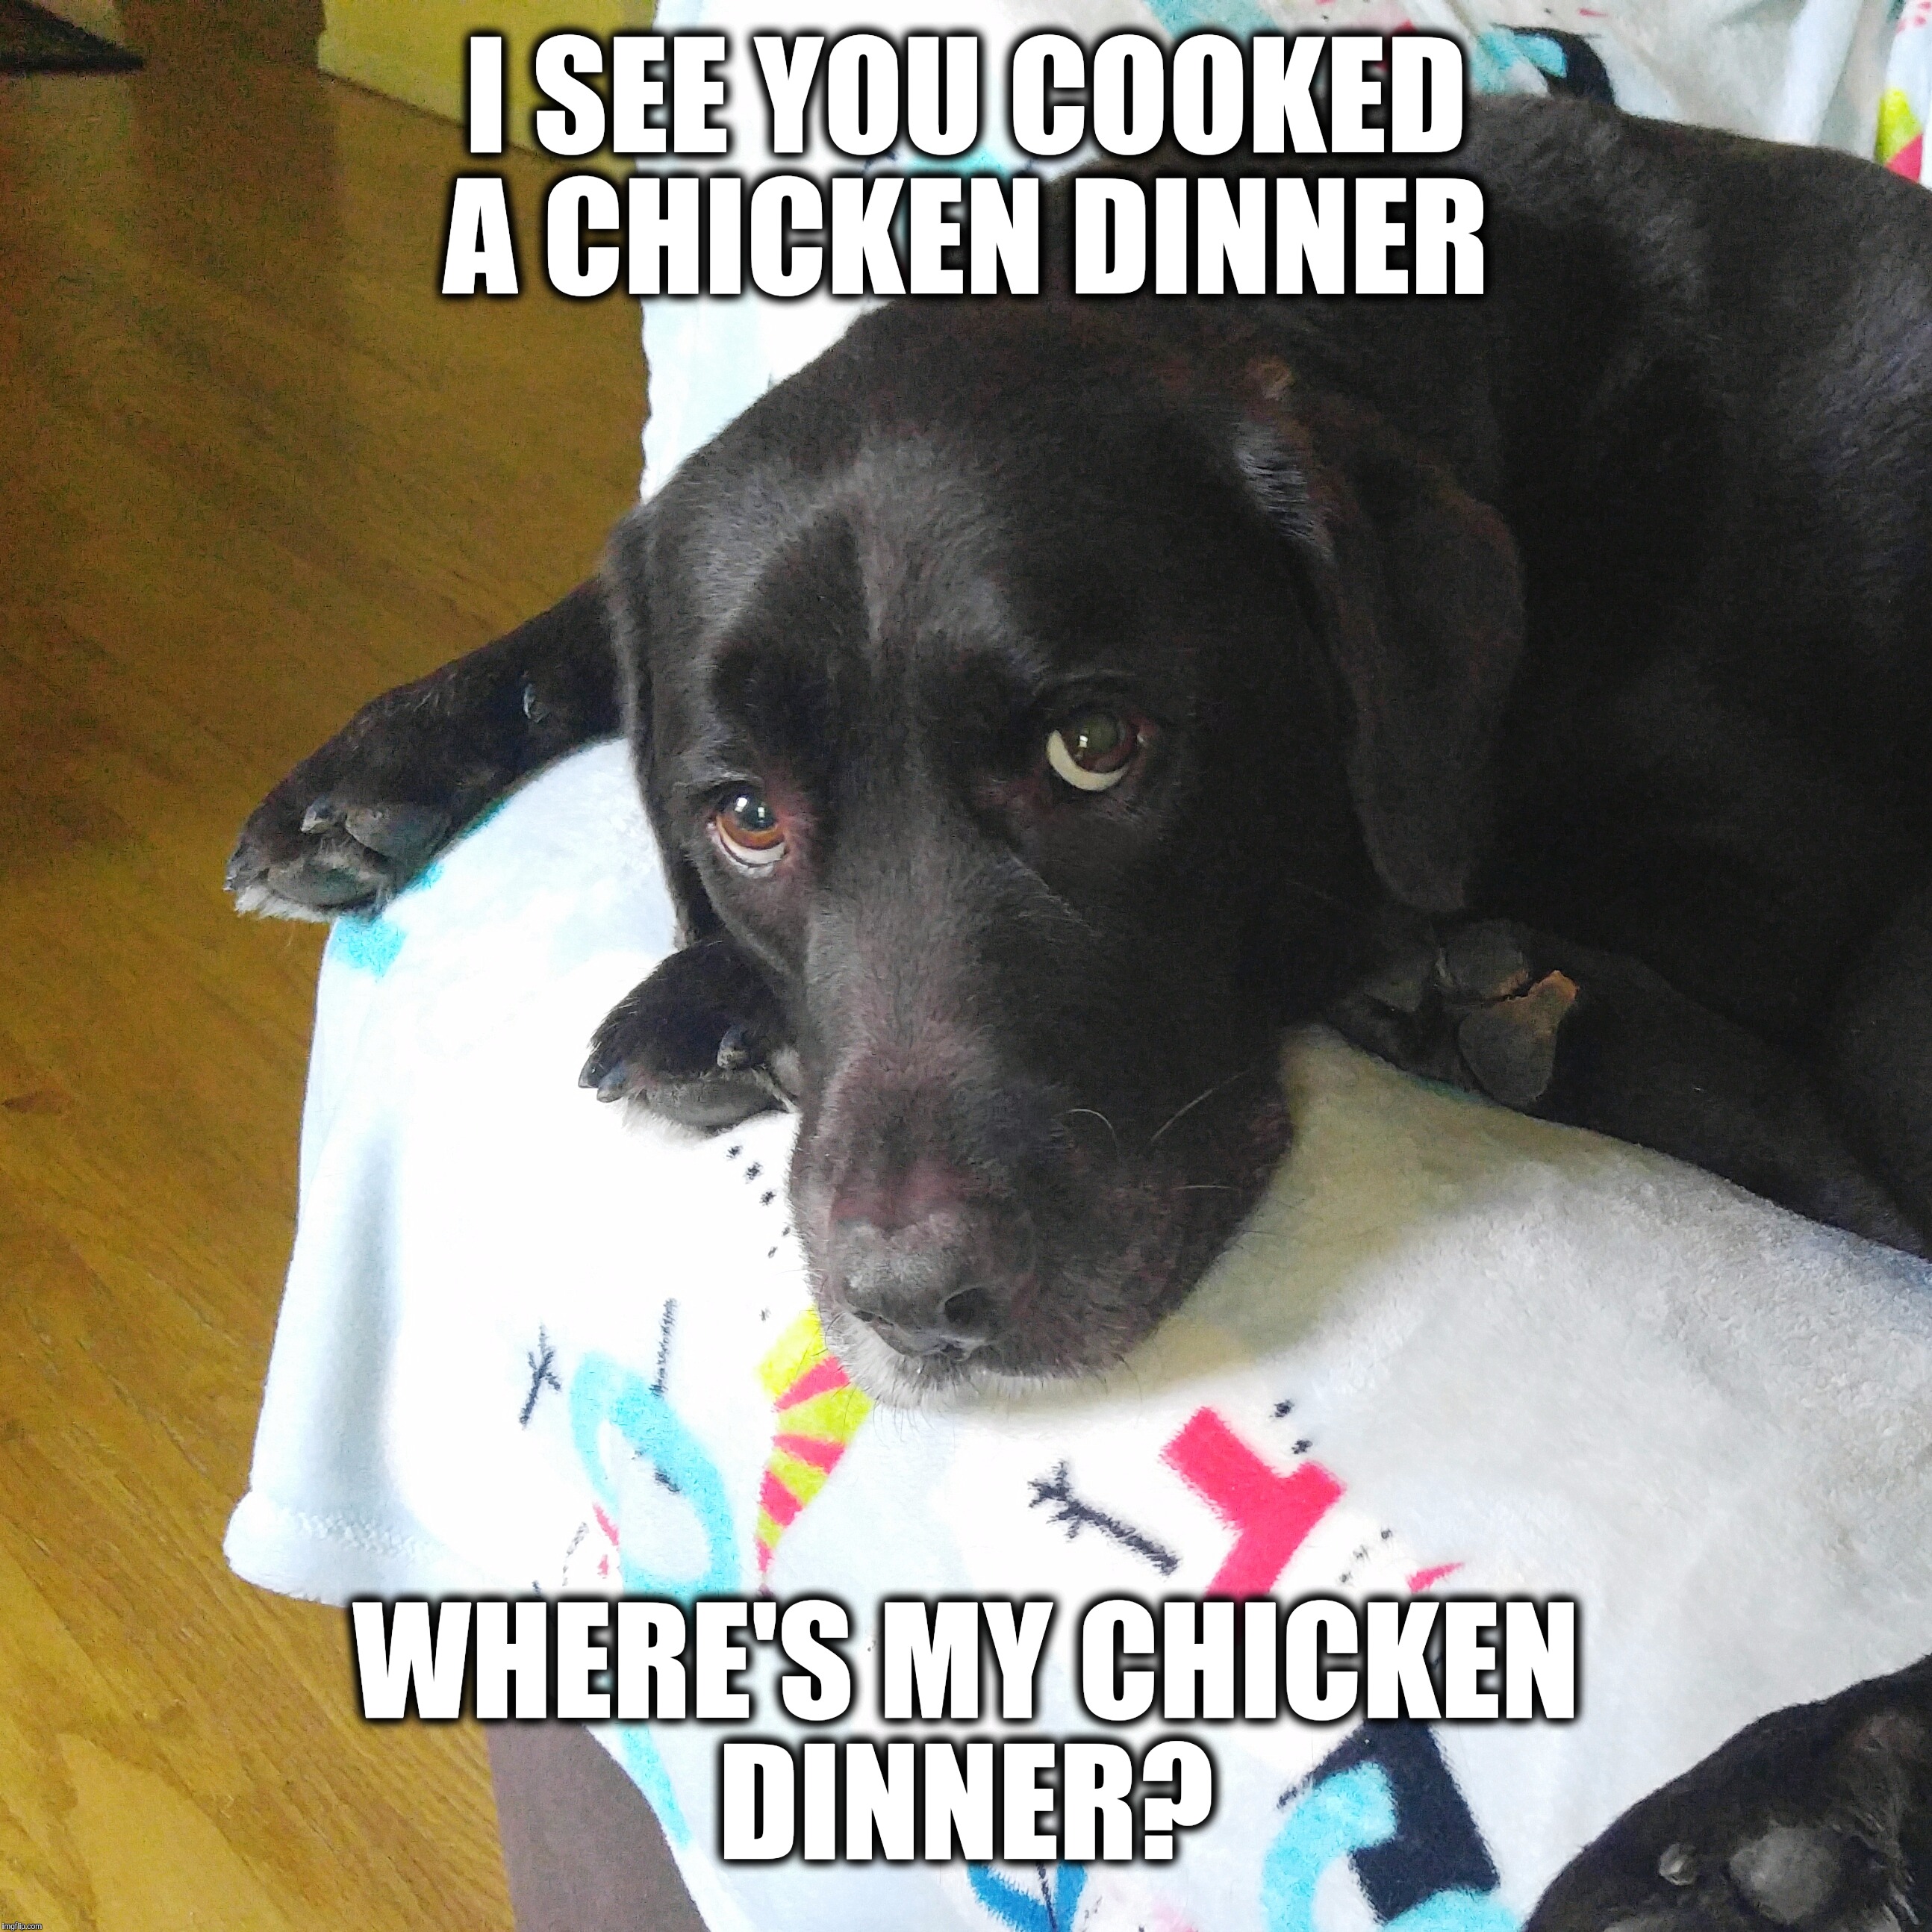 Chicken dinner  | I SEE YOU COOKED A CHICKEN DINNER; WHERE'S MY CHICKEN DINNER? | image tagged in chuckie the chocolate lab,dinner,hungry,labrador,dog,funny memes | made w/ Imgflip meme maker